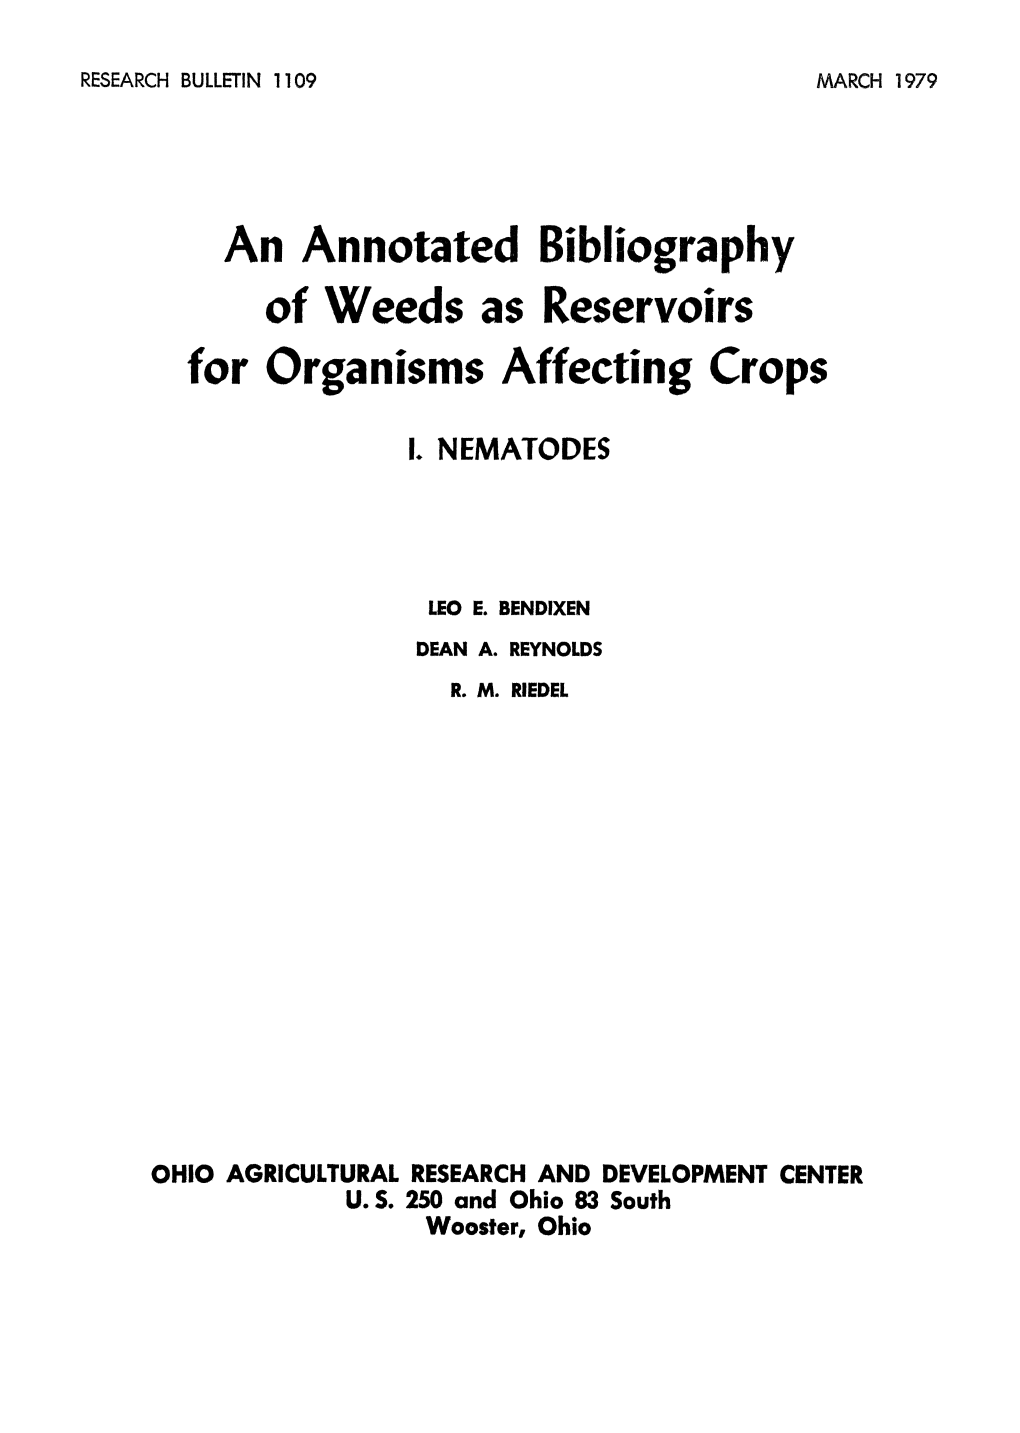 An Annotated Bibliography of Weeds As Reservoirs for Organisms Affecting Crops